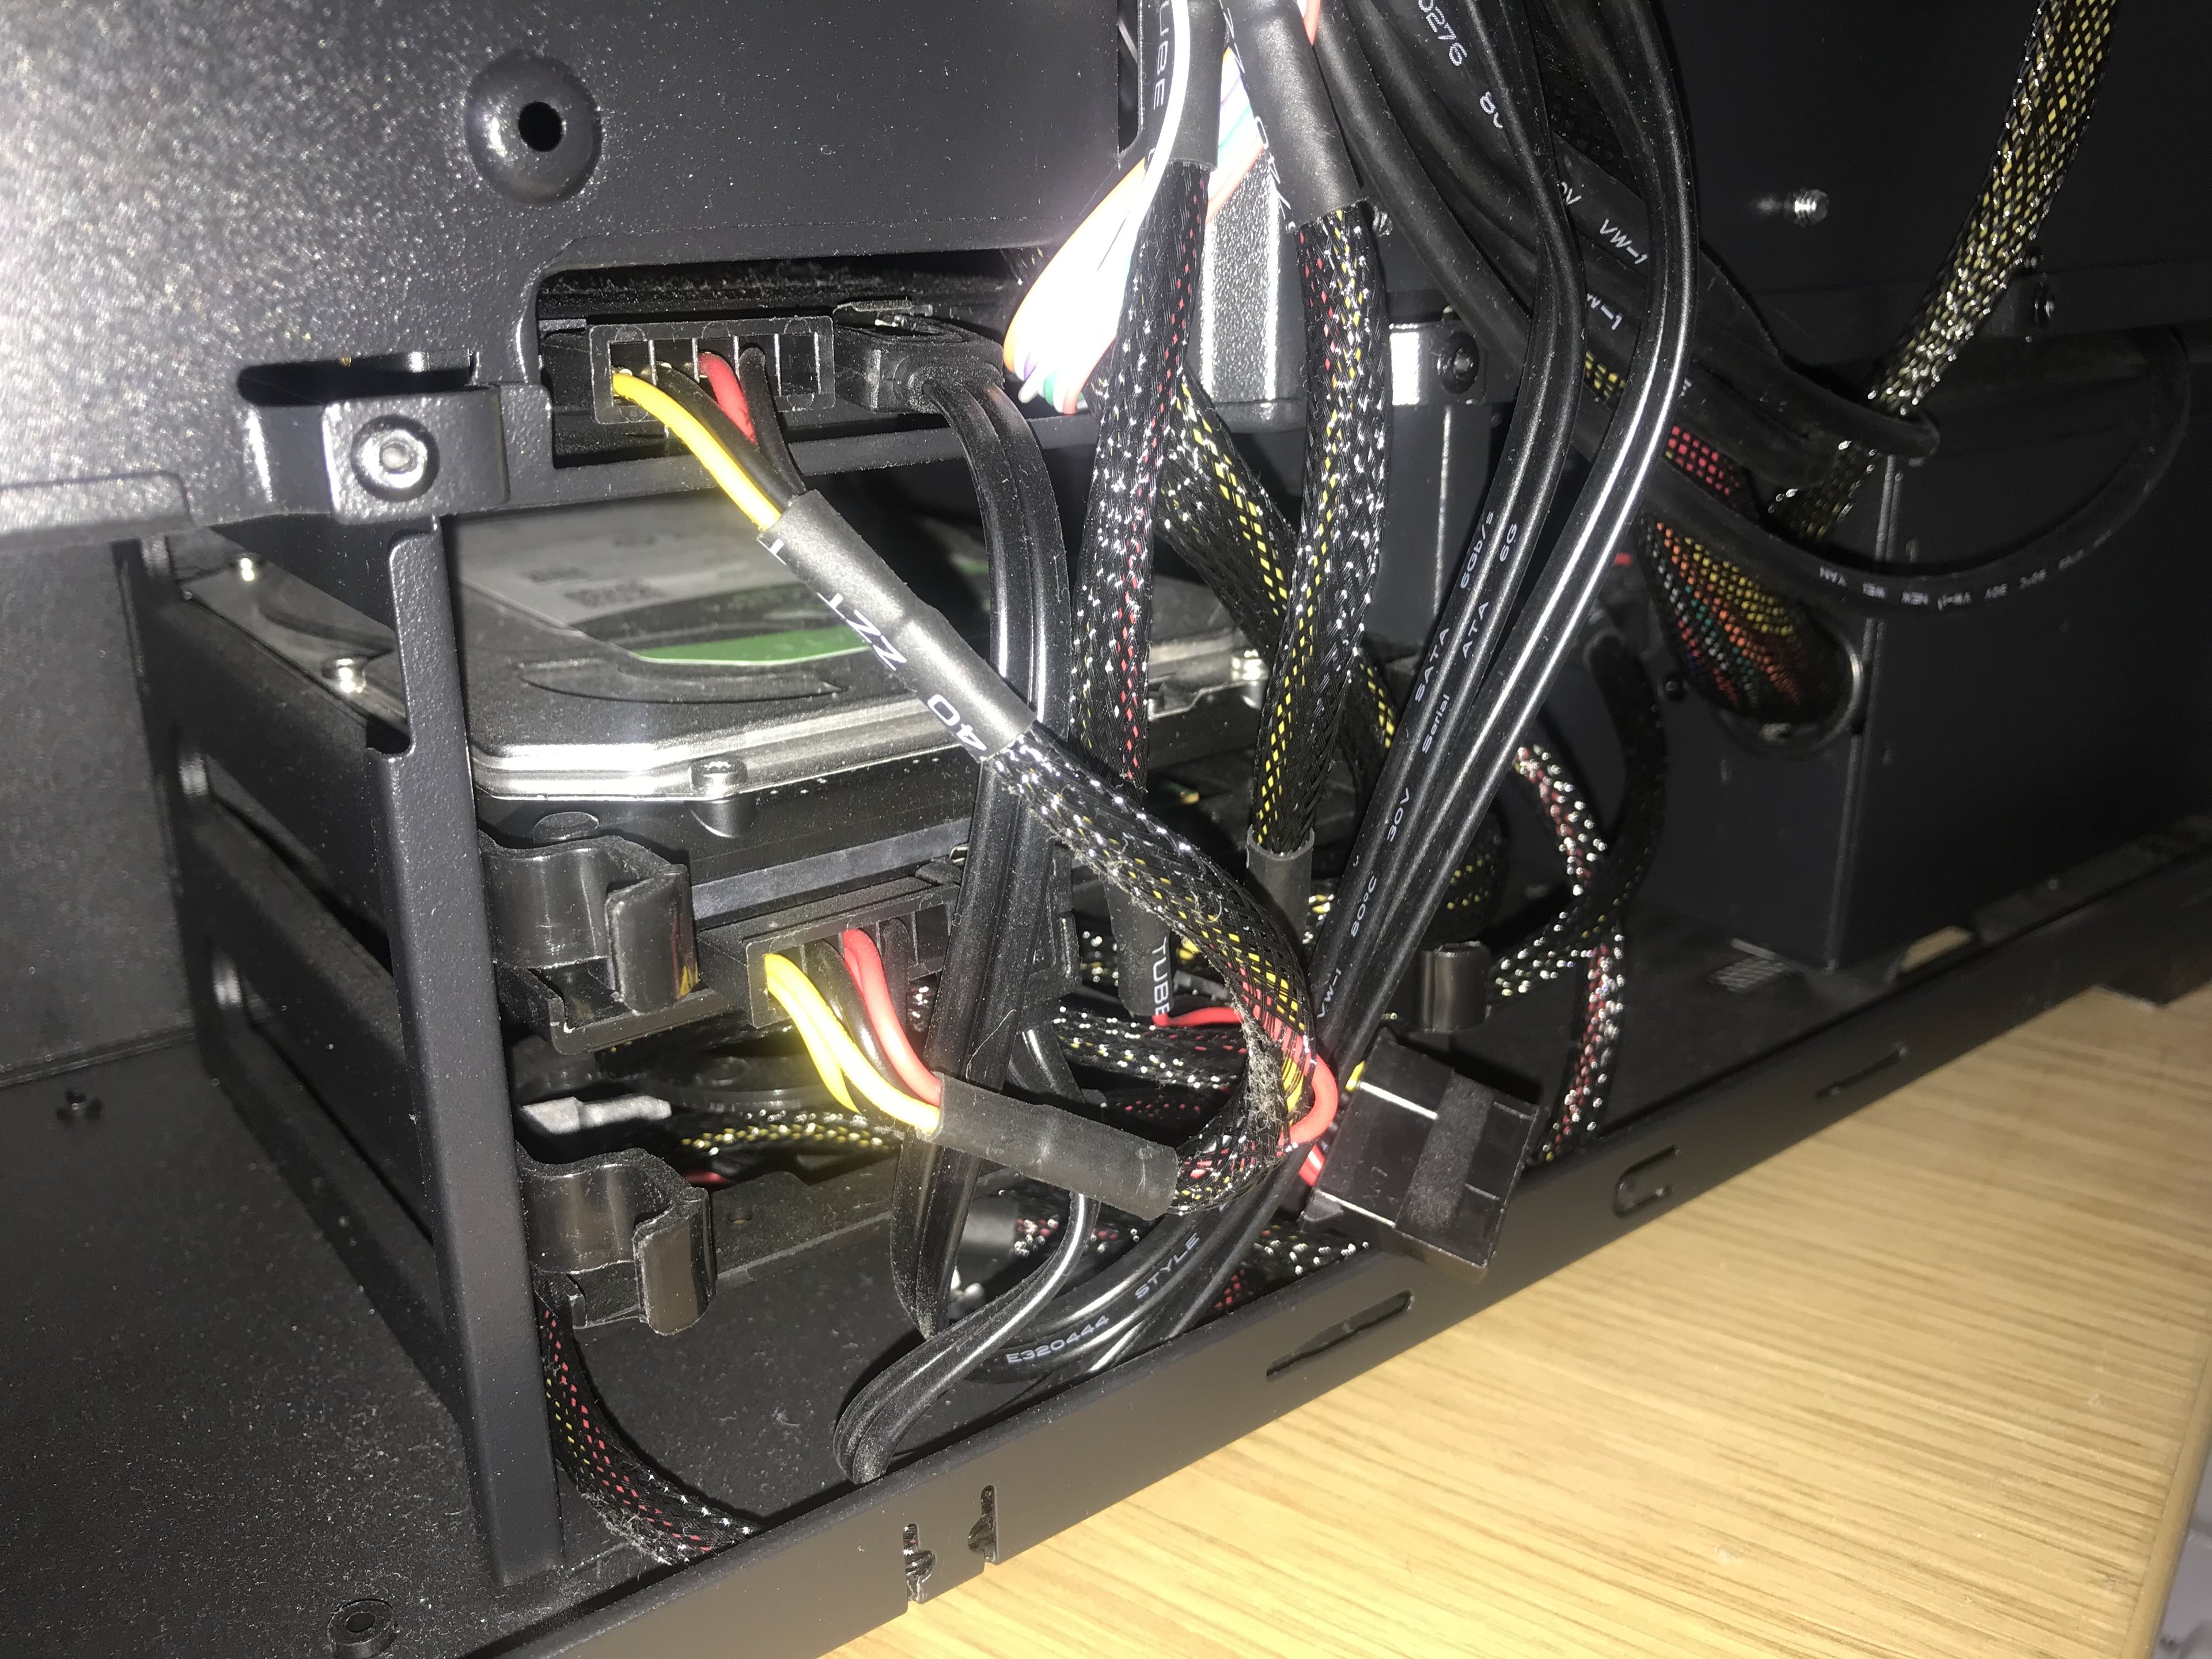 Is there a hard drive missing in this PC? - Page 2 - Computers, Gadgets & Stuff - PistonHeads